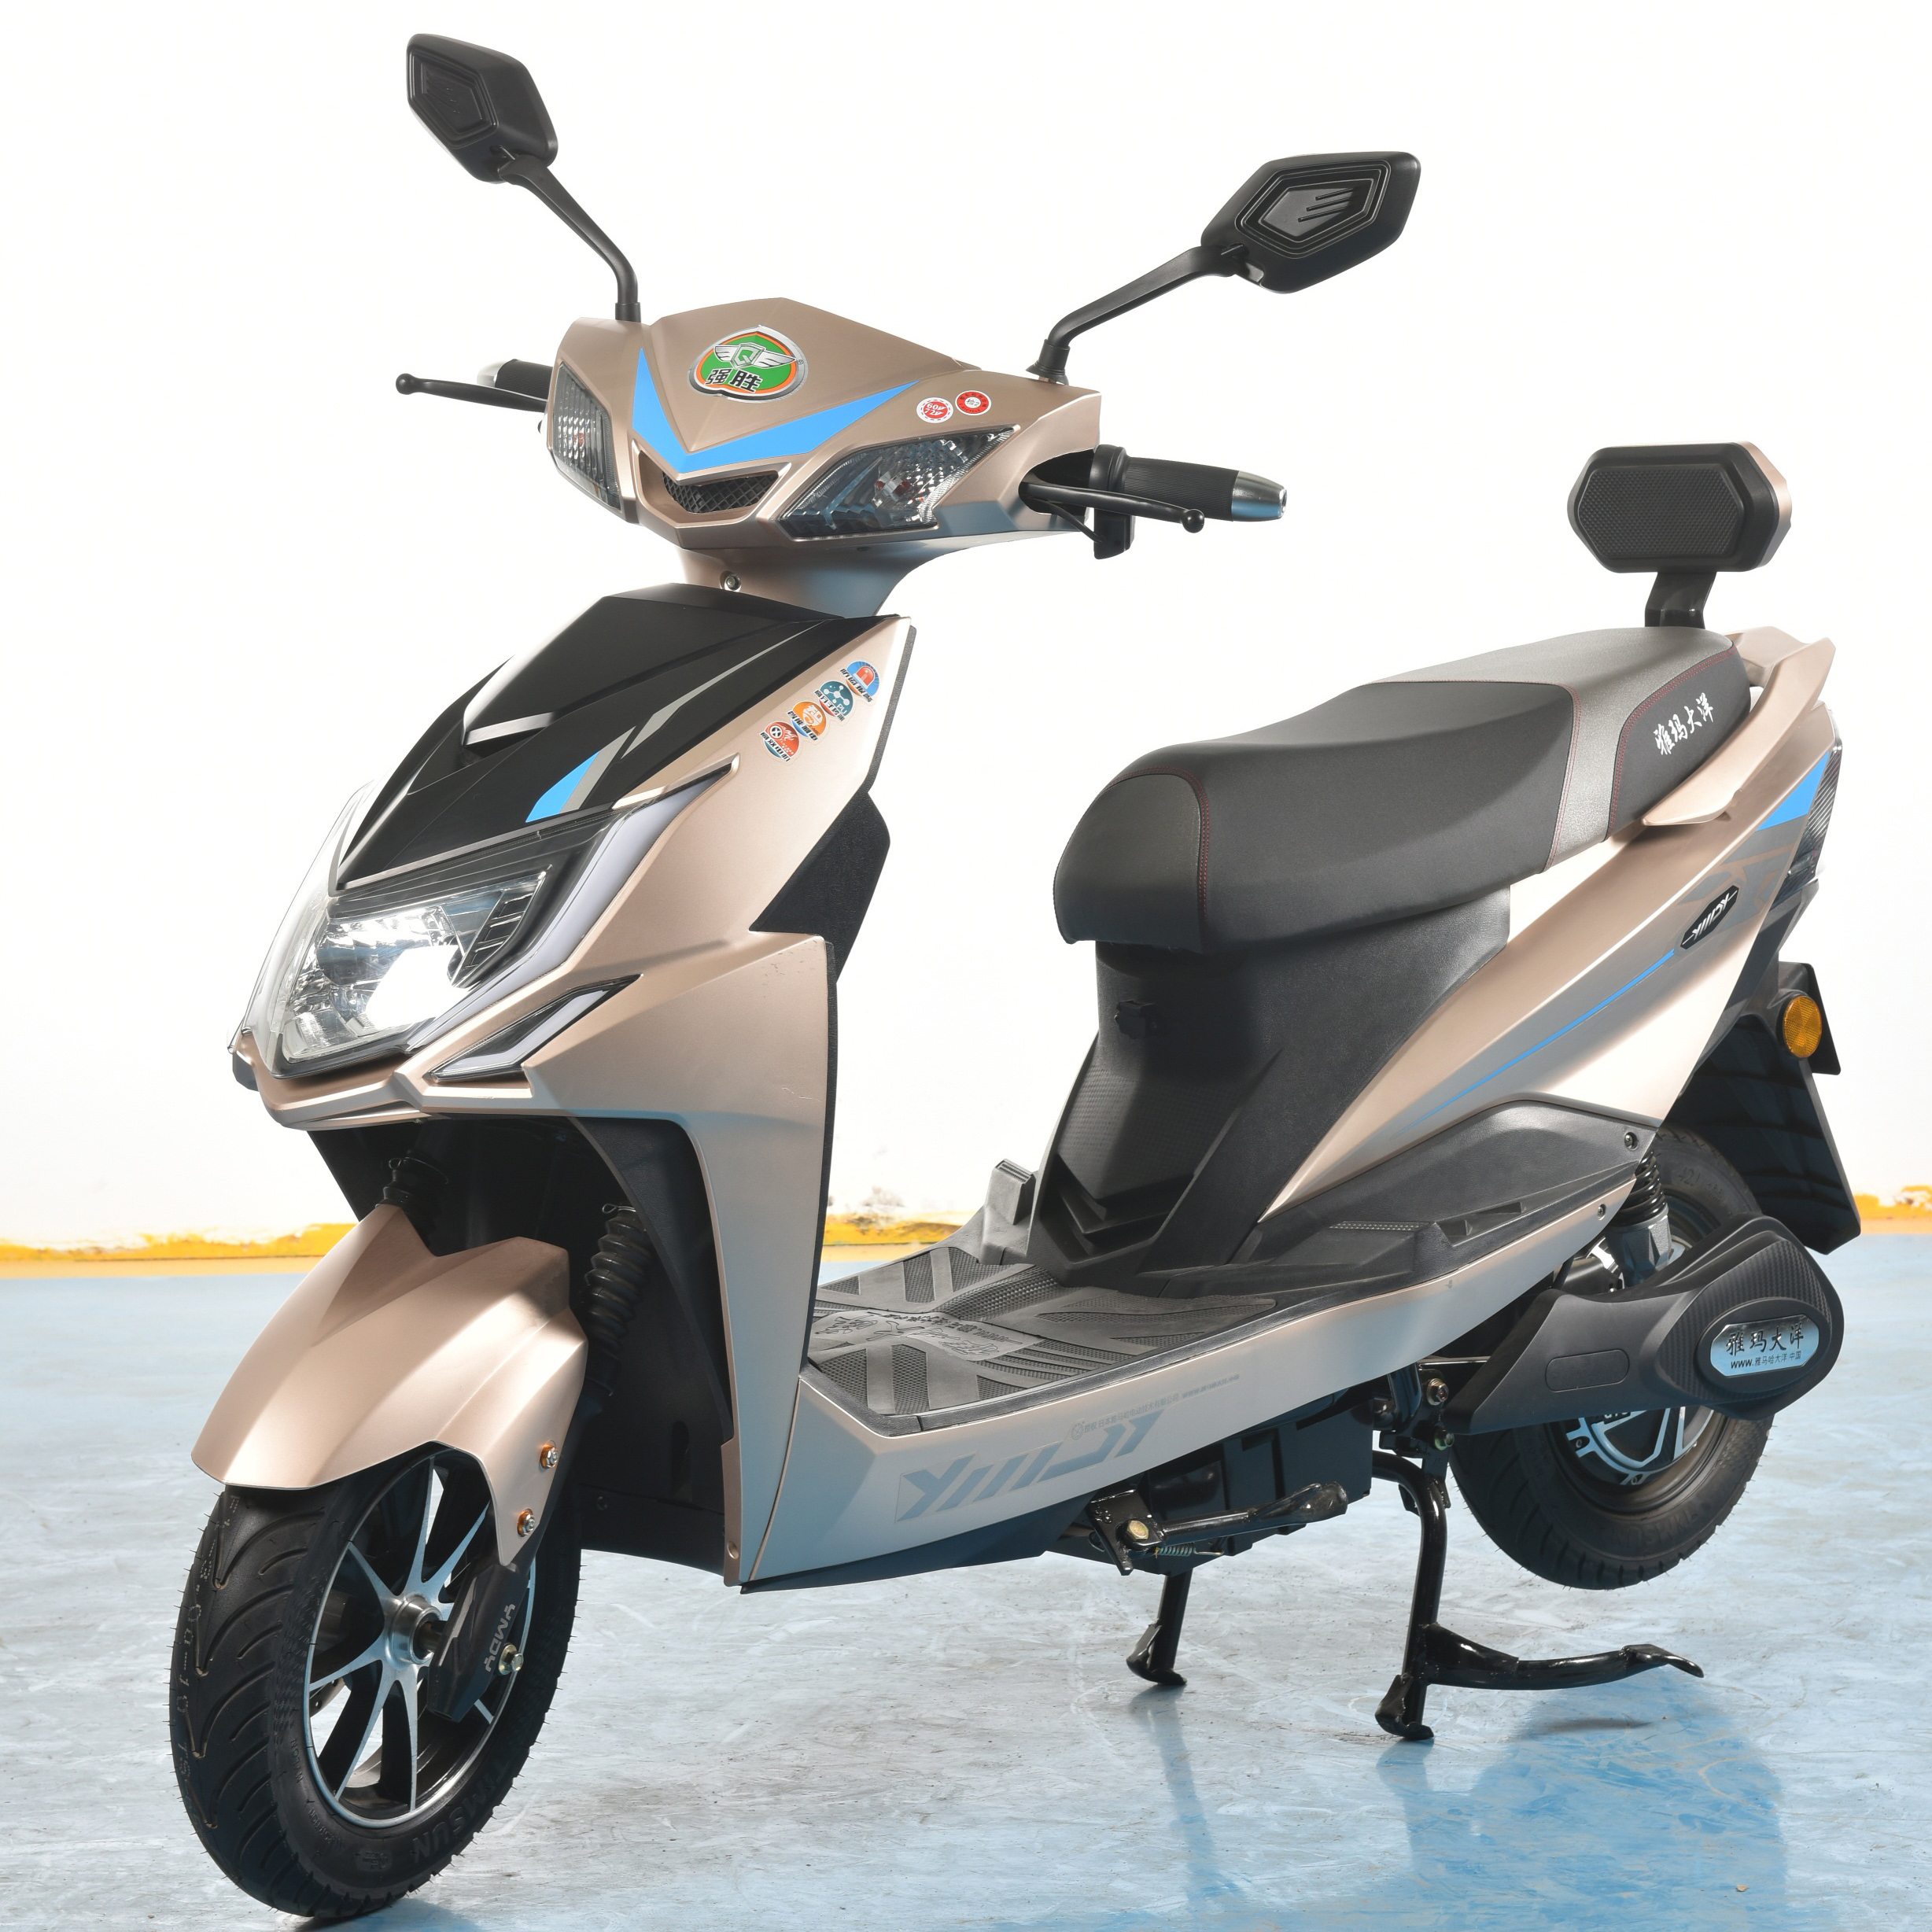 China Wholesale Electric Tricycles Passenger/For Passenger Manufacturers - 2020 New Electric Motorcycle 2 Wheels China Electric Motorbike Ebike – Qiangsheng